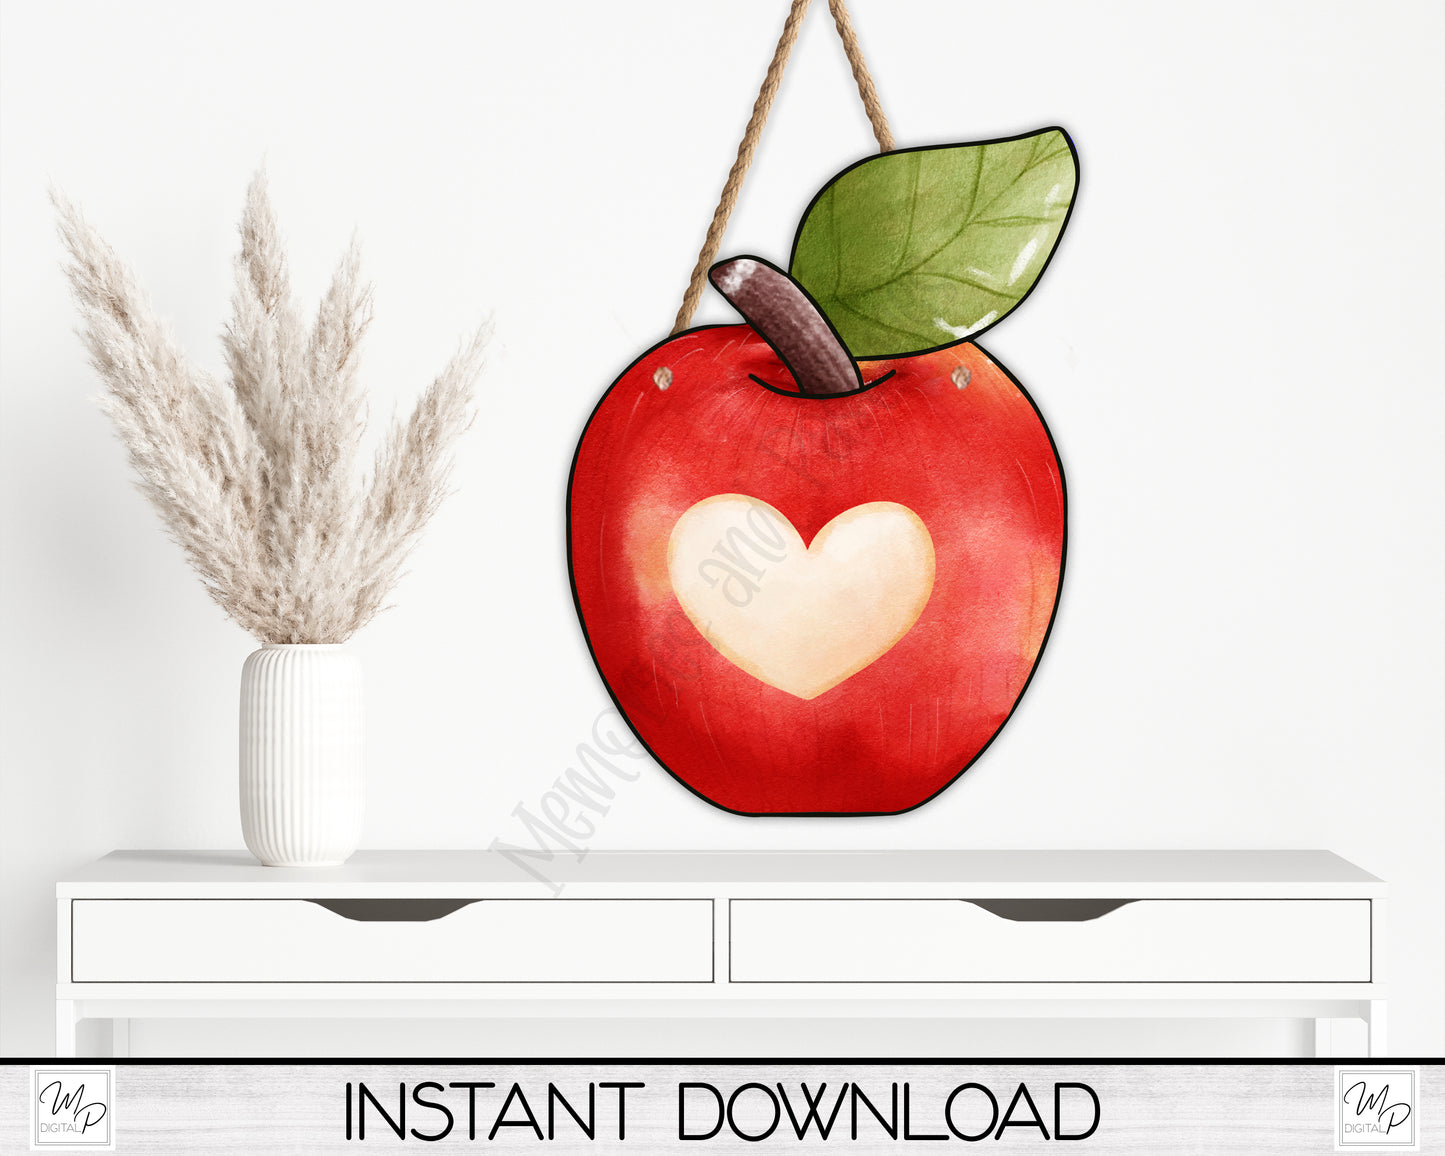 Apple PNG Design for Sublimation of Earrings, Signs, Keychains, Digital Download